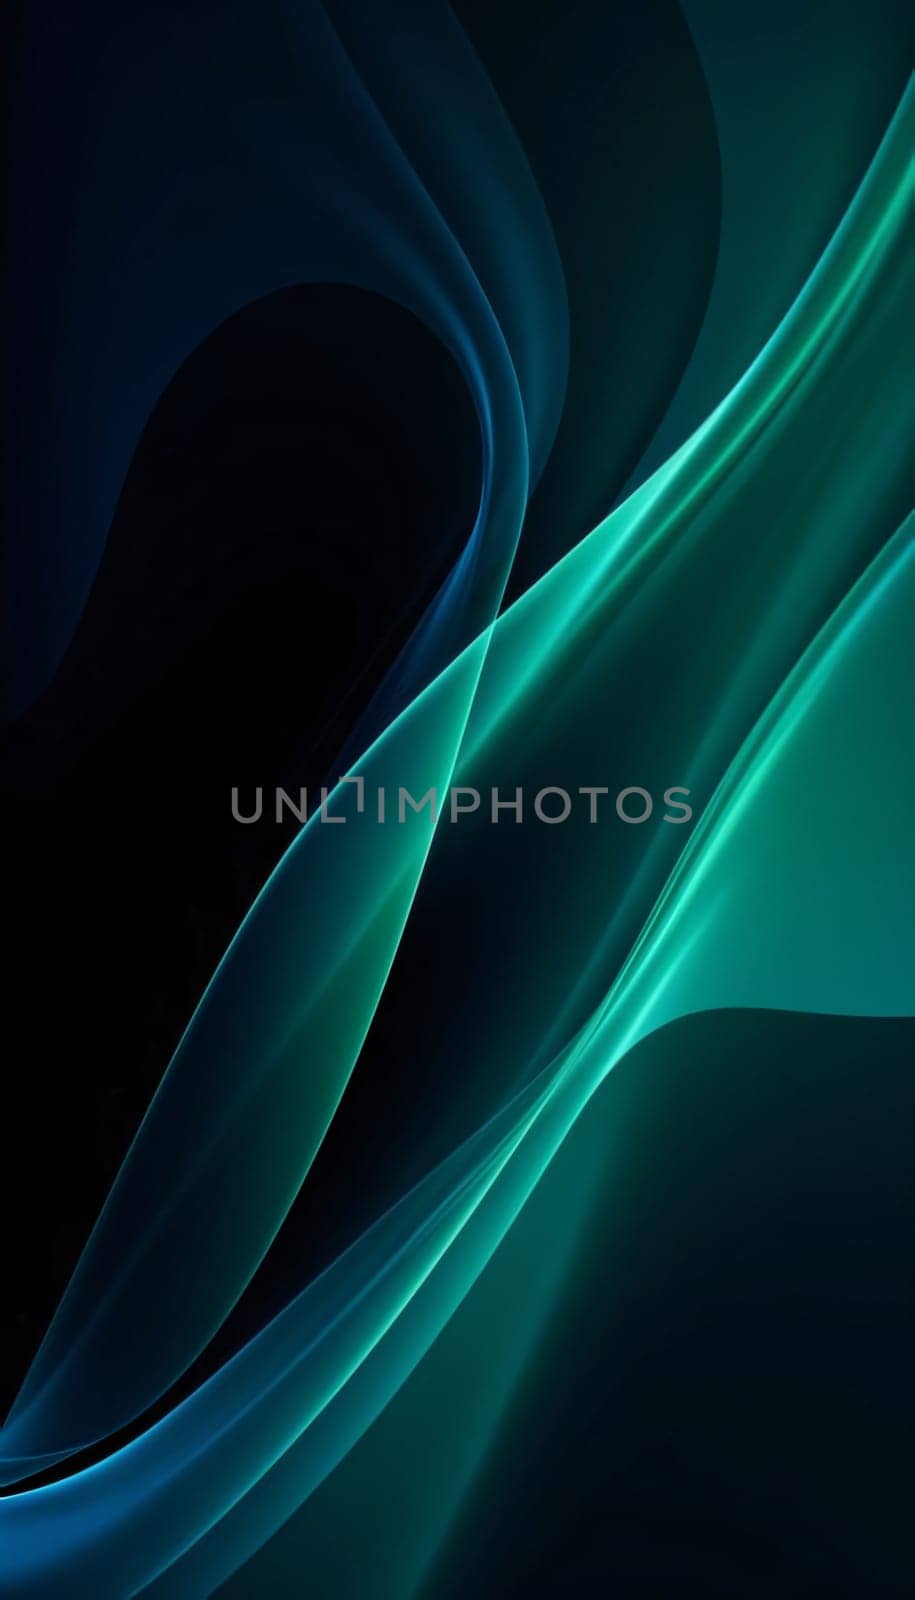 abstract background with smooth lines in green and blue colors, illustration by ThemesS